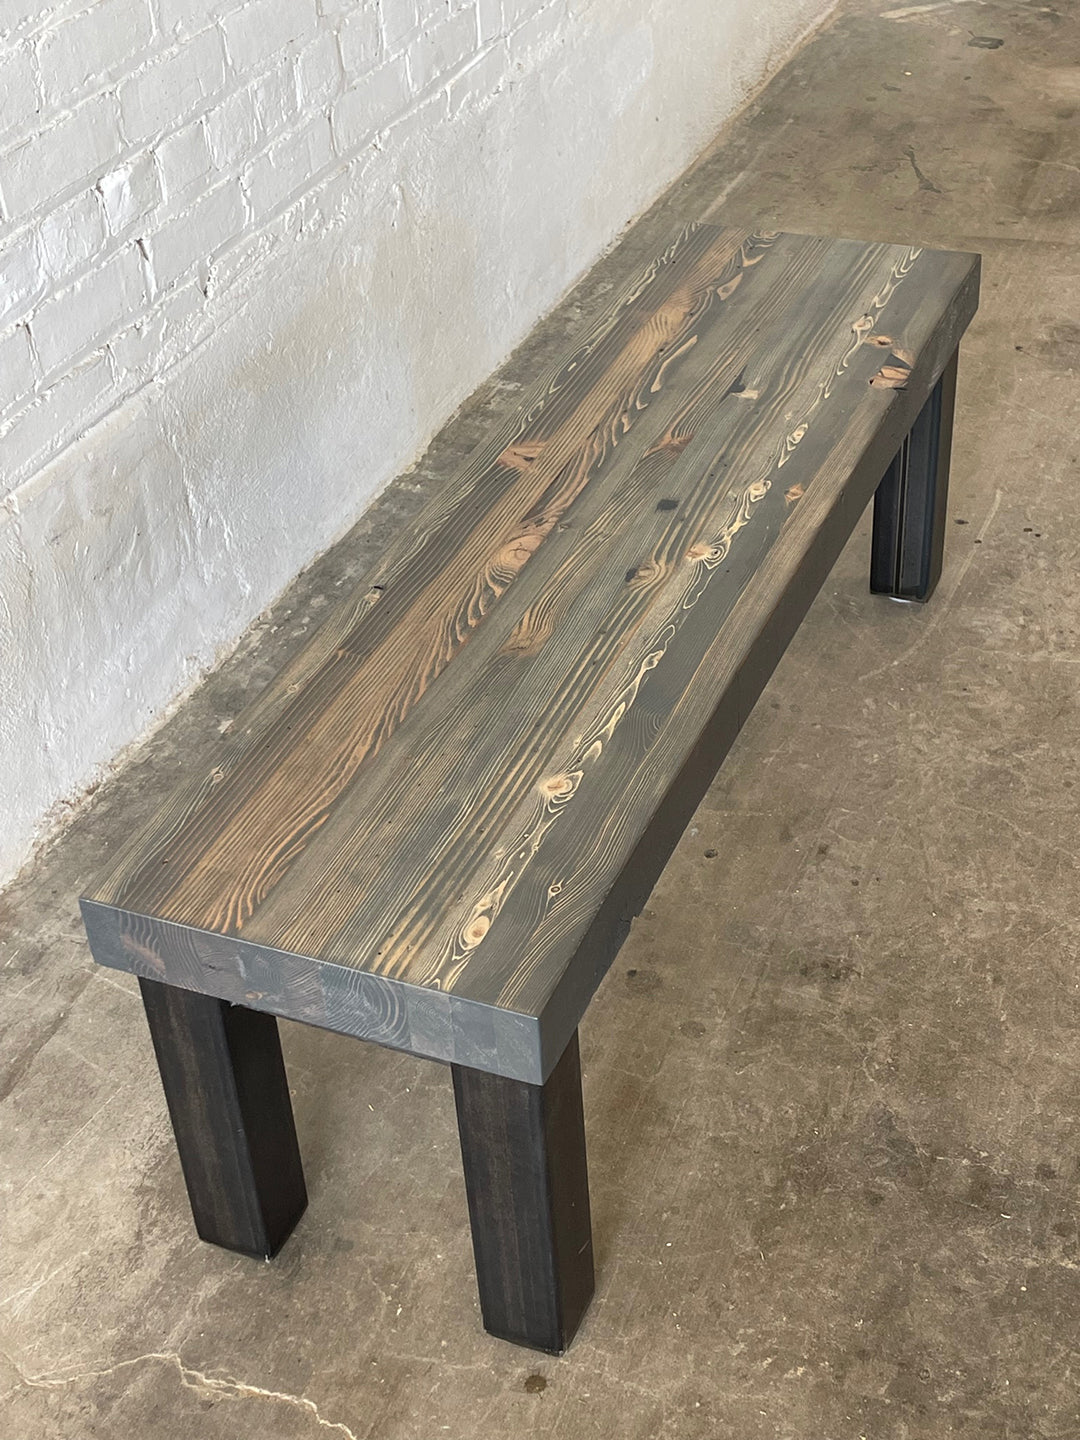 High Street Bench - Reclaimed Wood - Carbon Gray Stain Finish